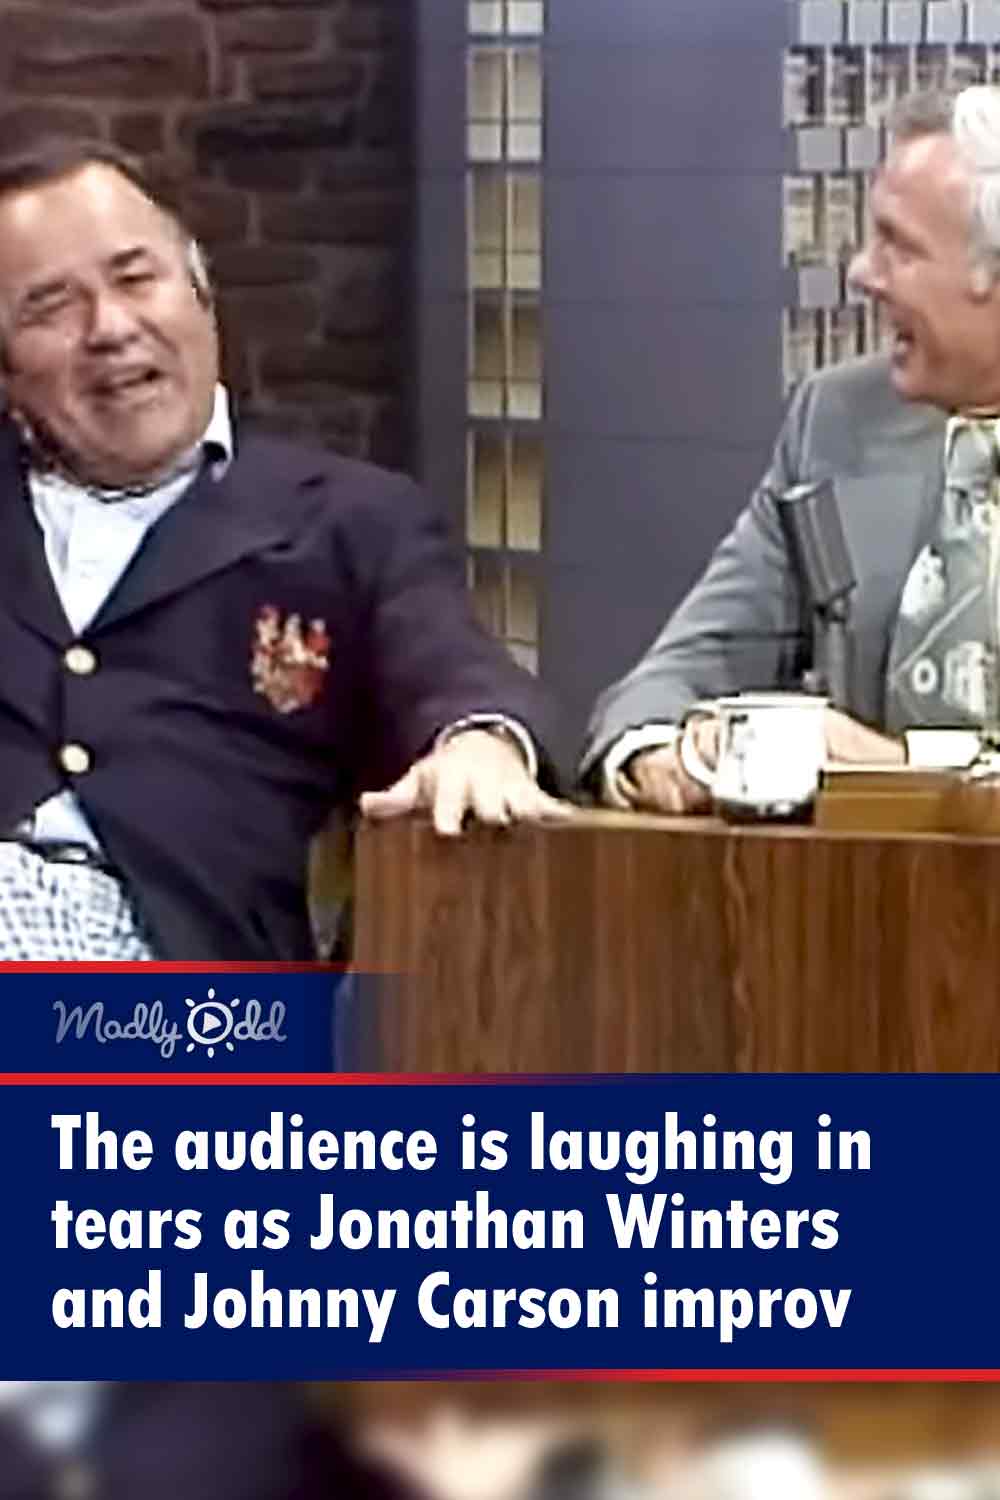 The audience is laughing in tears as Jonathan Winters and Johnny Carson improv